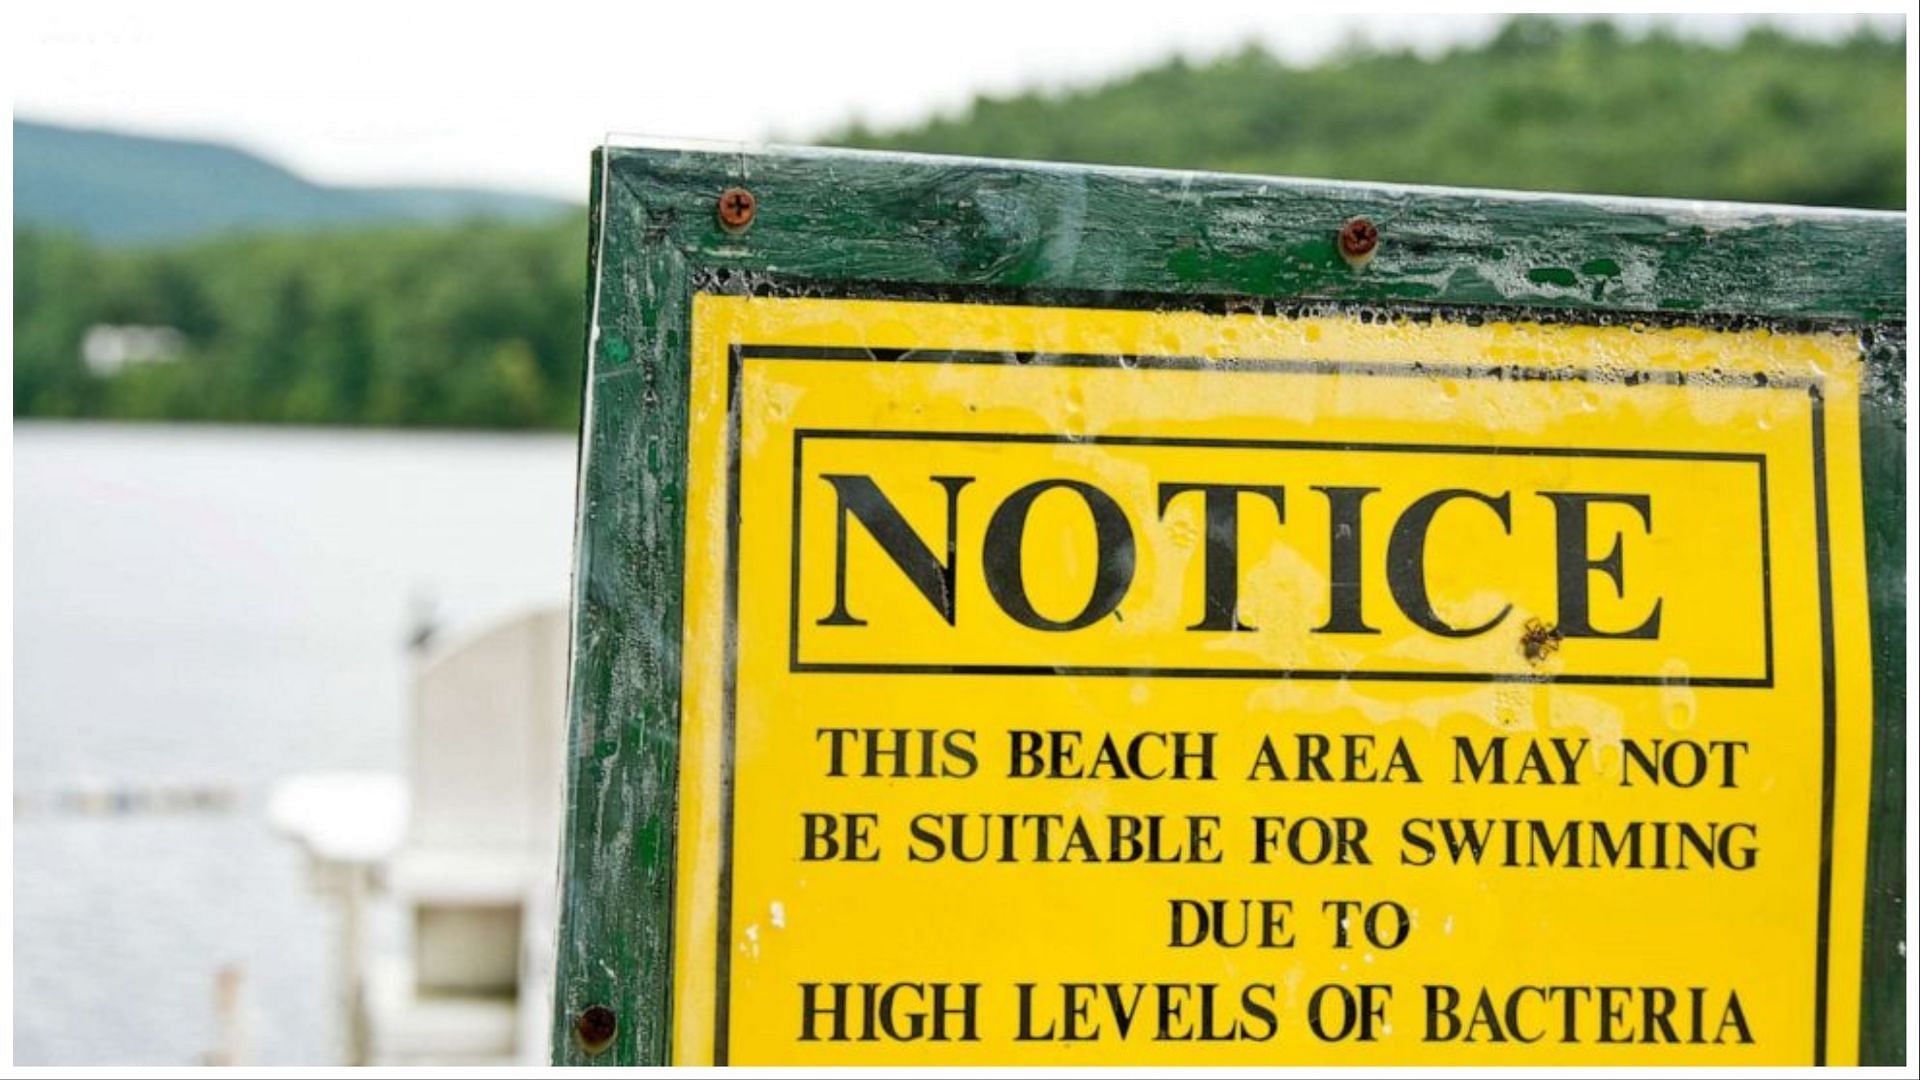 The notice reads that the beach may not be suitable for swimming due to high levels of bacteria (Image via Getty Images)